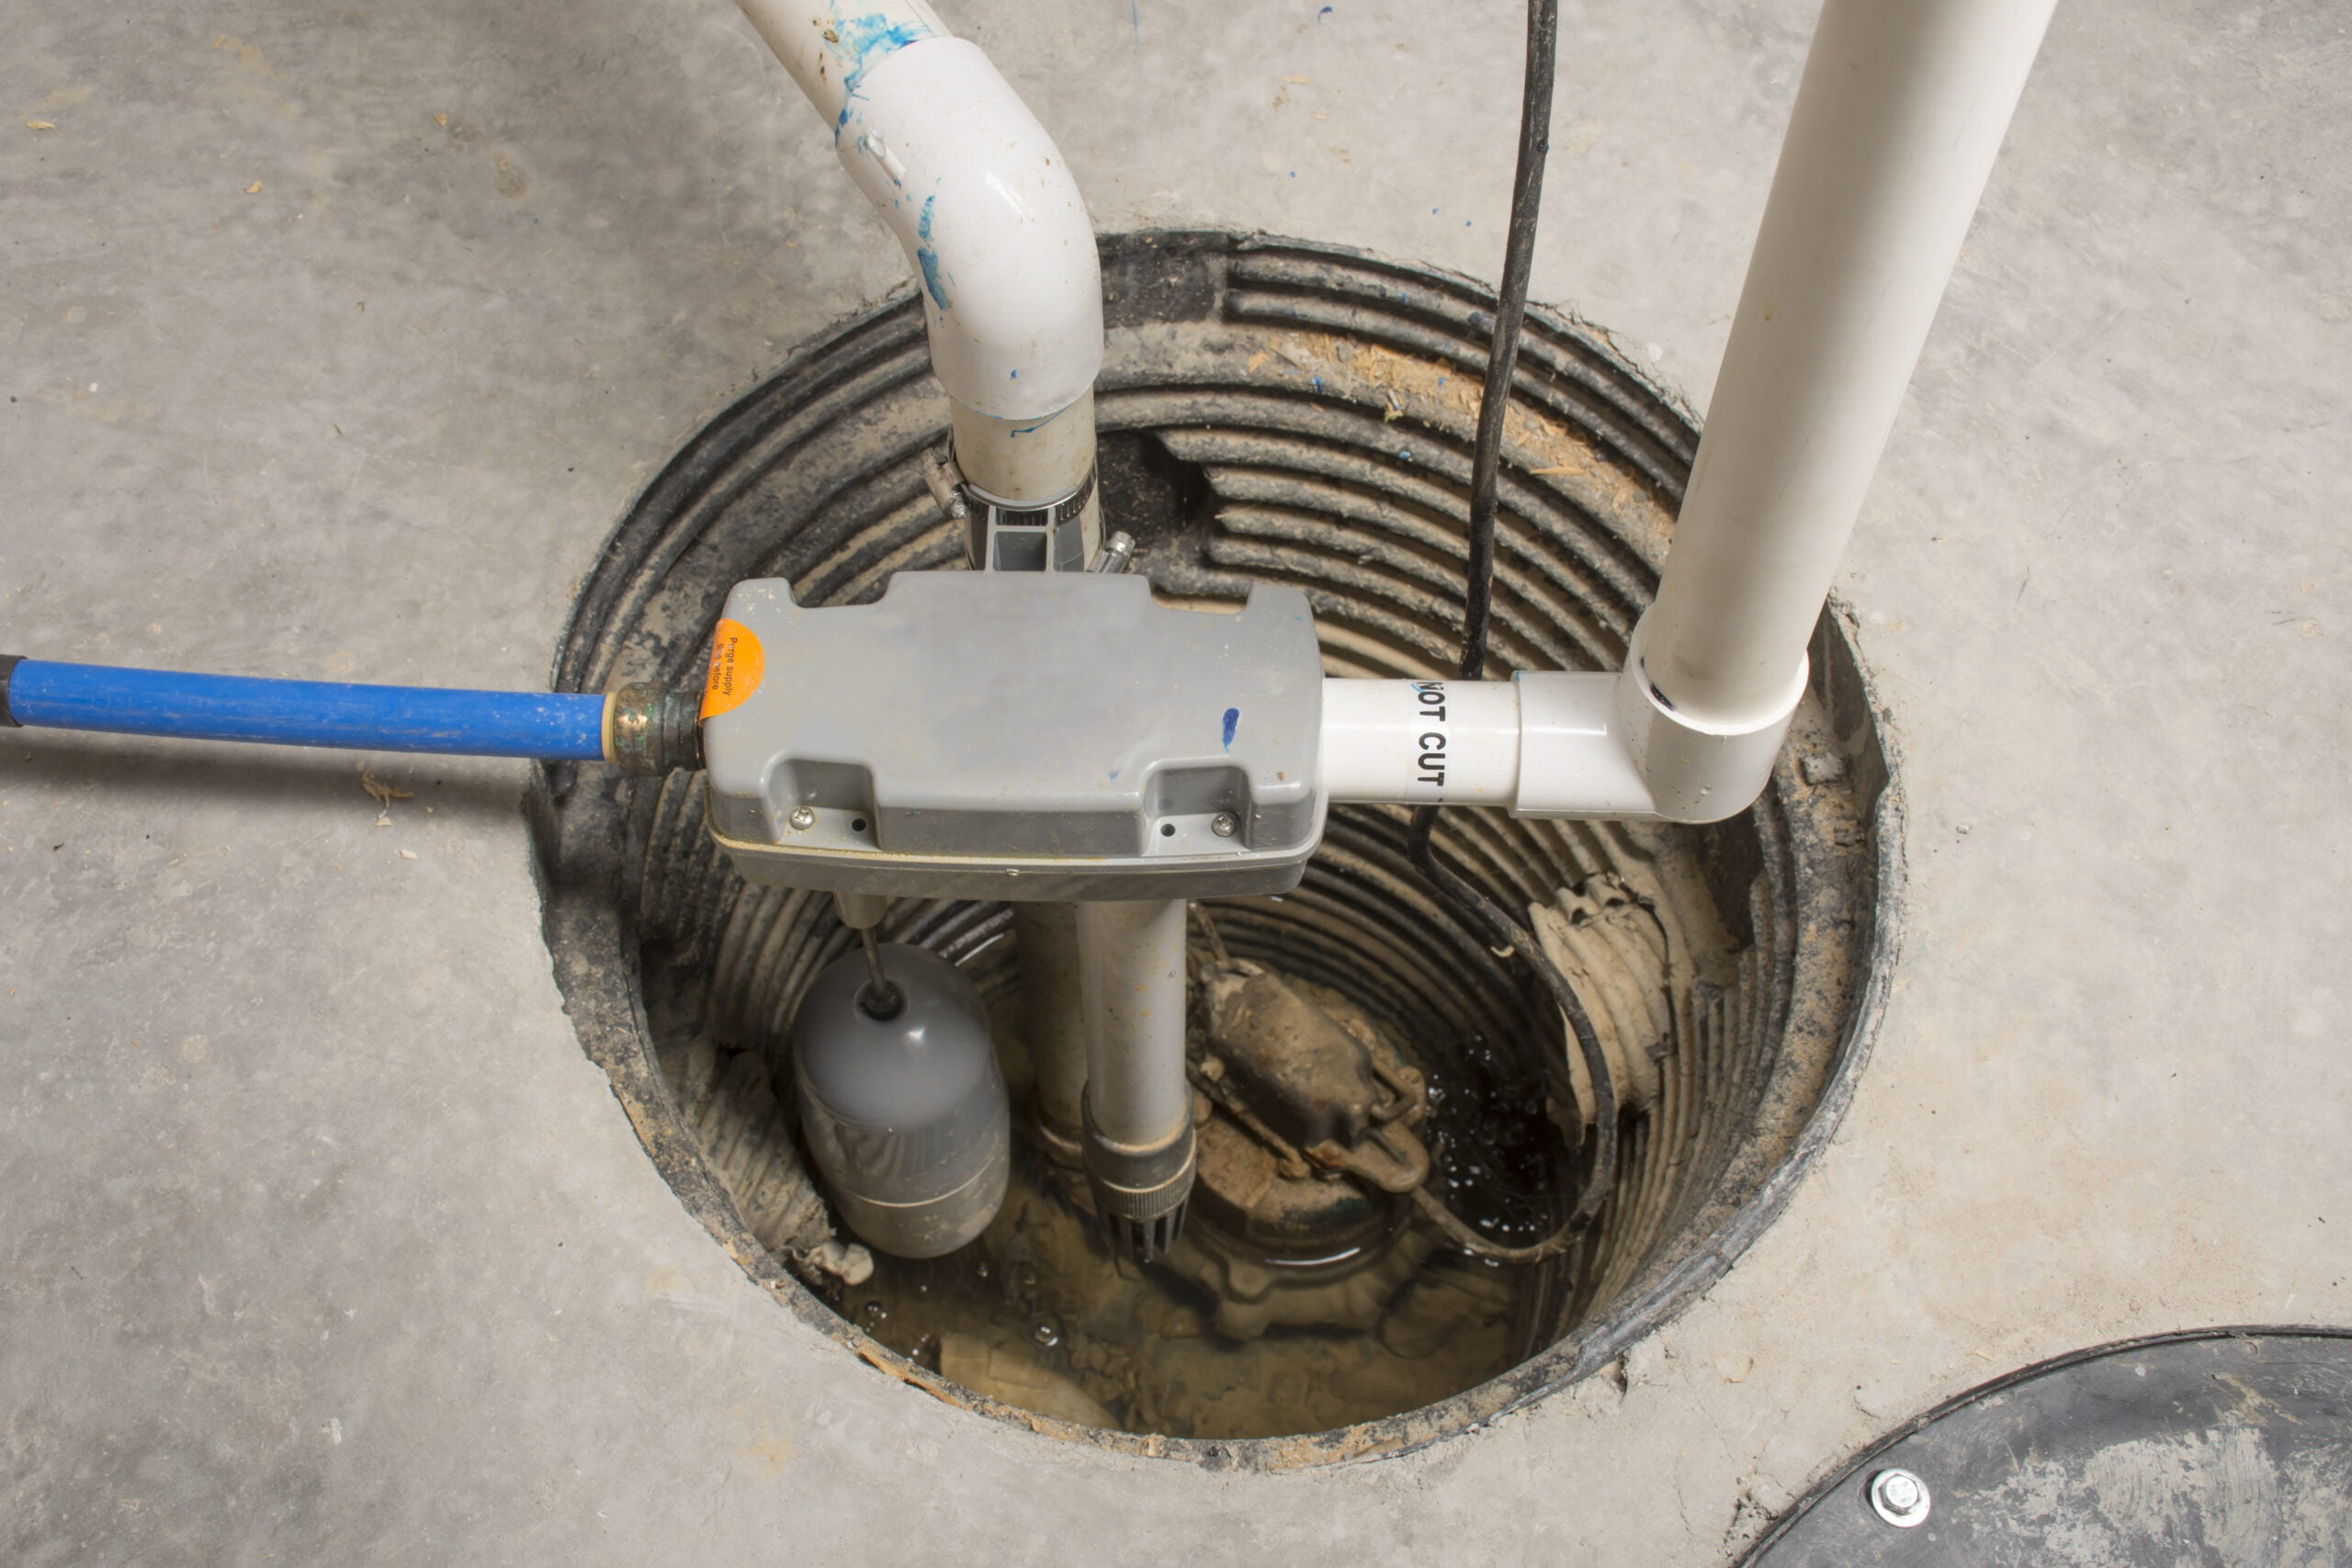 Sump Pump Maintenance to Prevent Water Damage and Basement Flooding